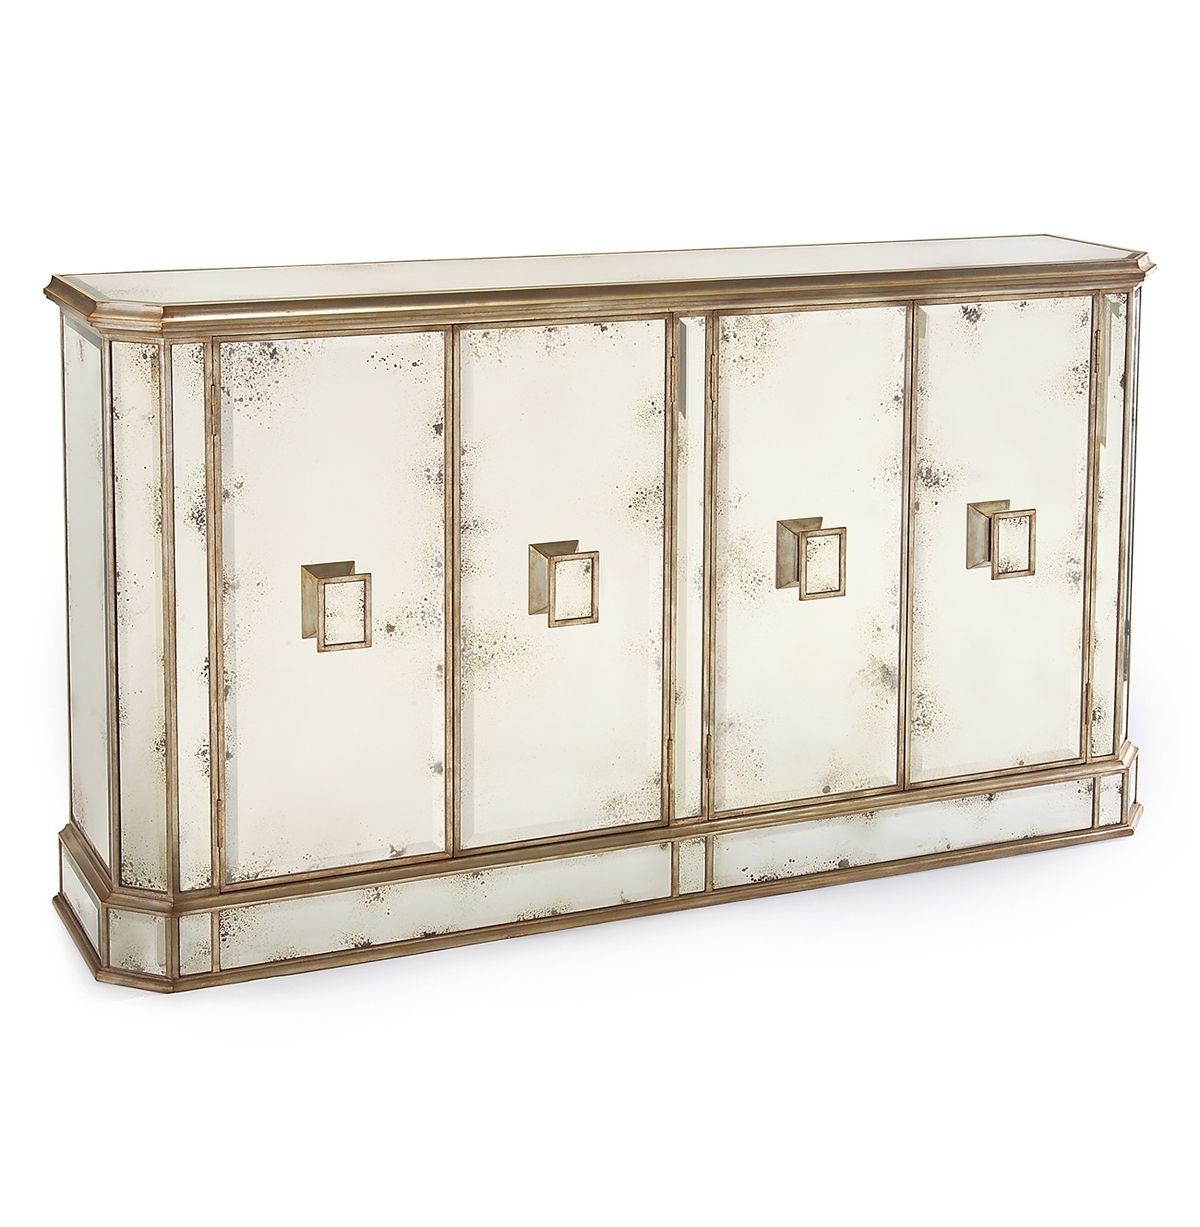 Buffets & Sideboards | Kathy Kuo Home Throughout 2017 Aged Mirrored 4 Door Sideboards (View 11 of 20)